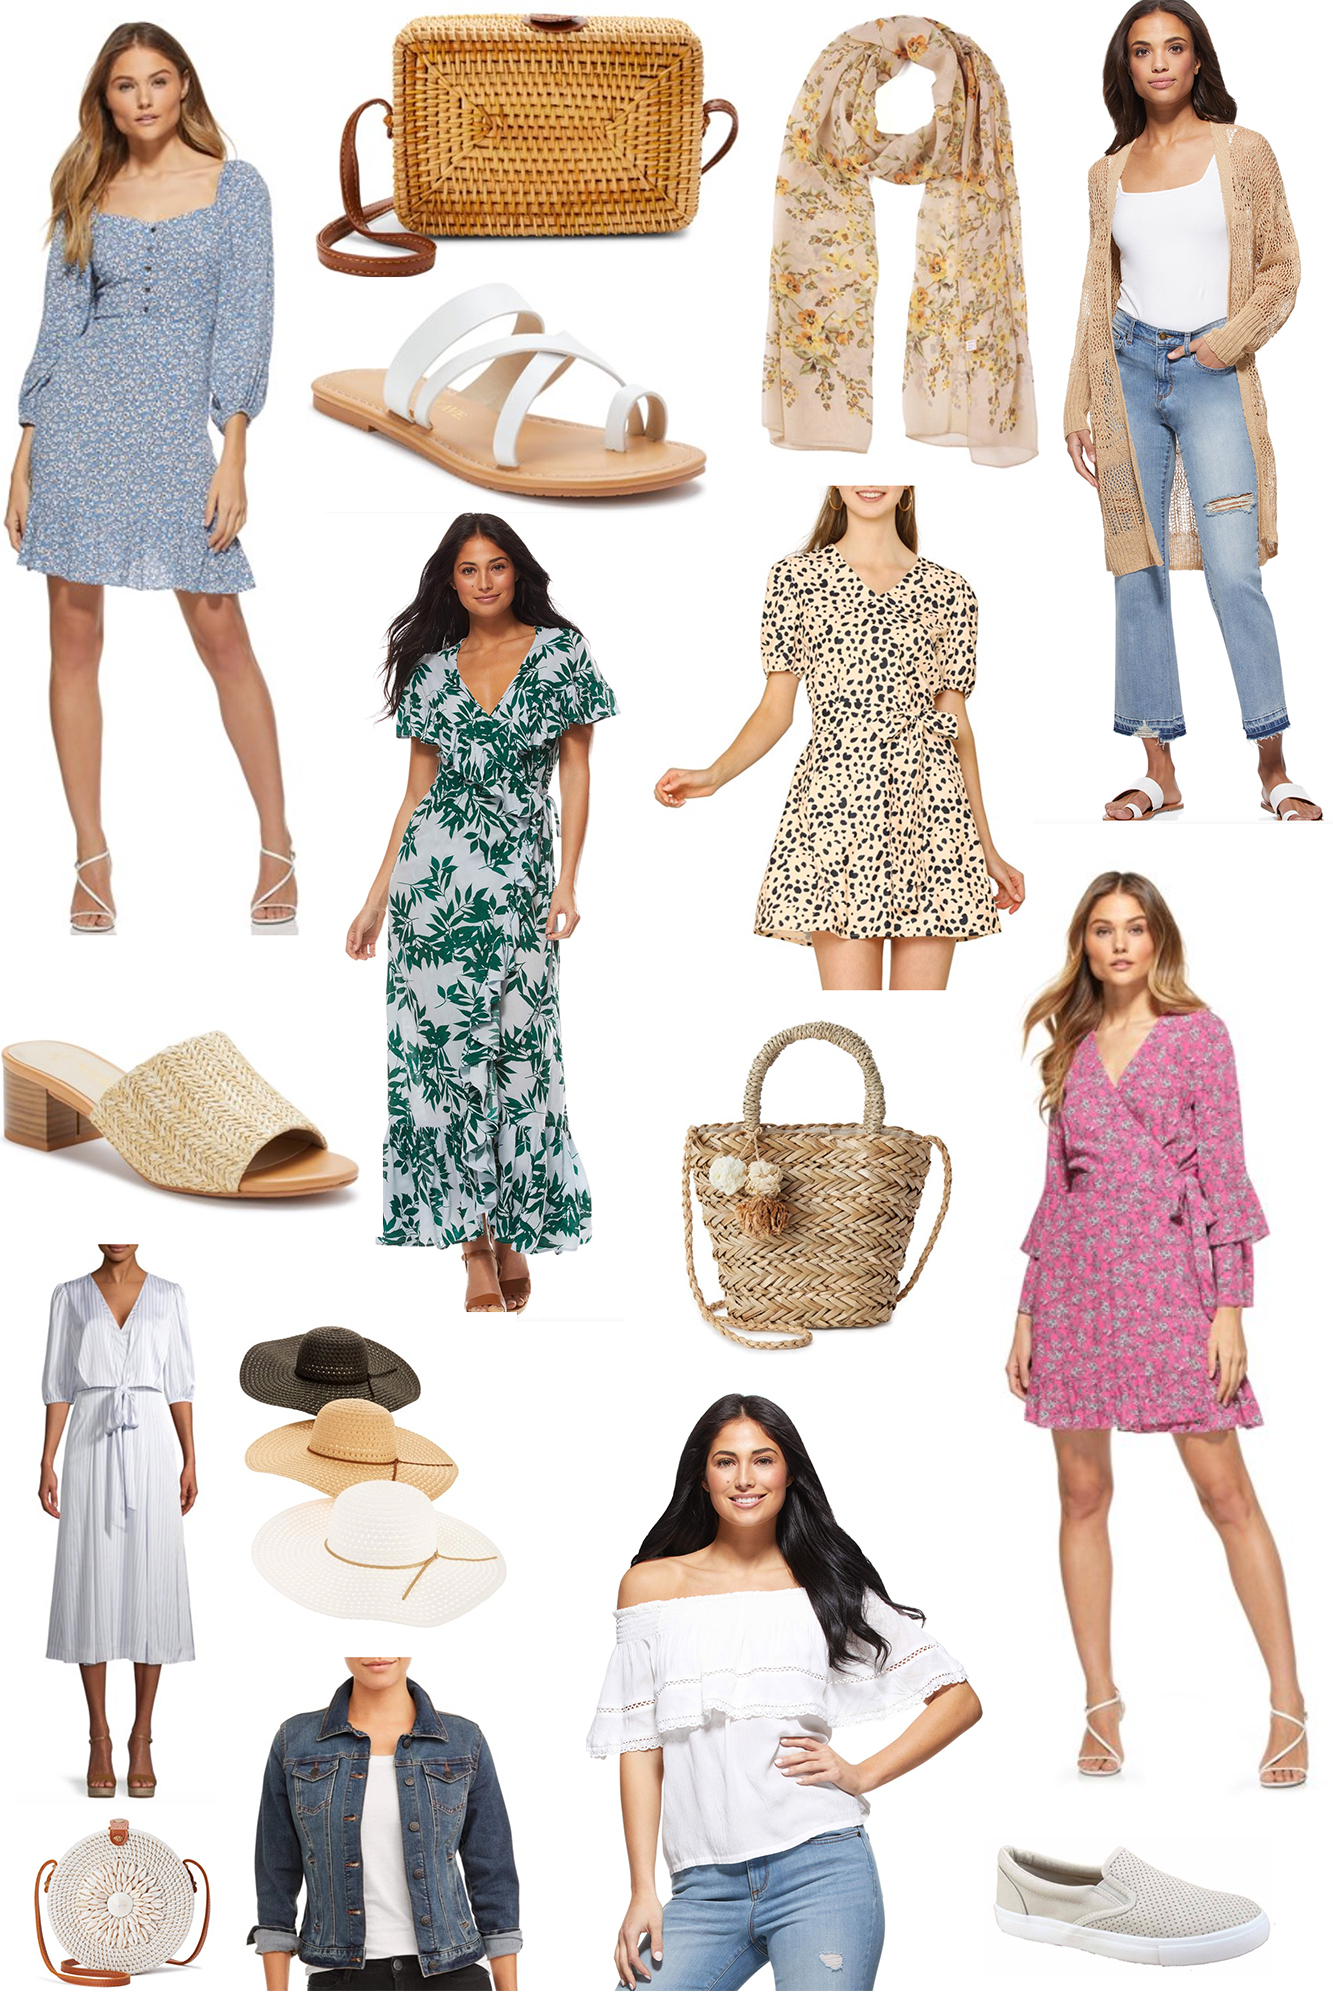 Spring to Summer Transitional Fashion Ideas - Affordable yet stylish outfit ideas for Summer 2020. Comfort is key & cute accessories